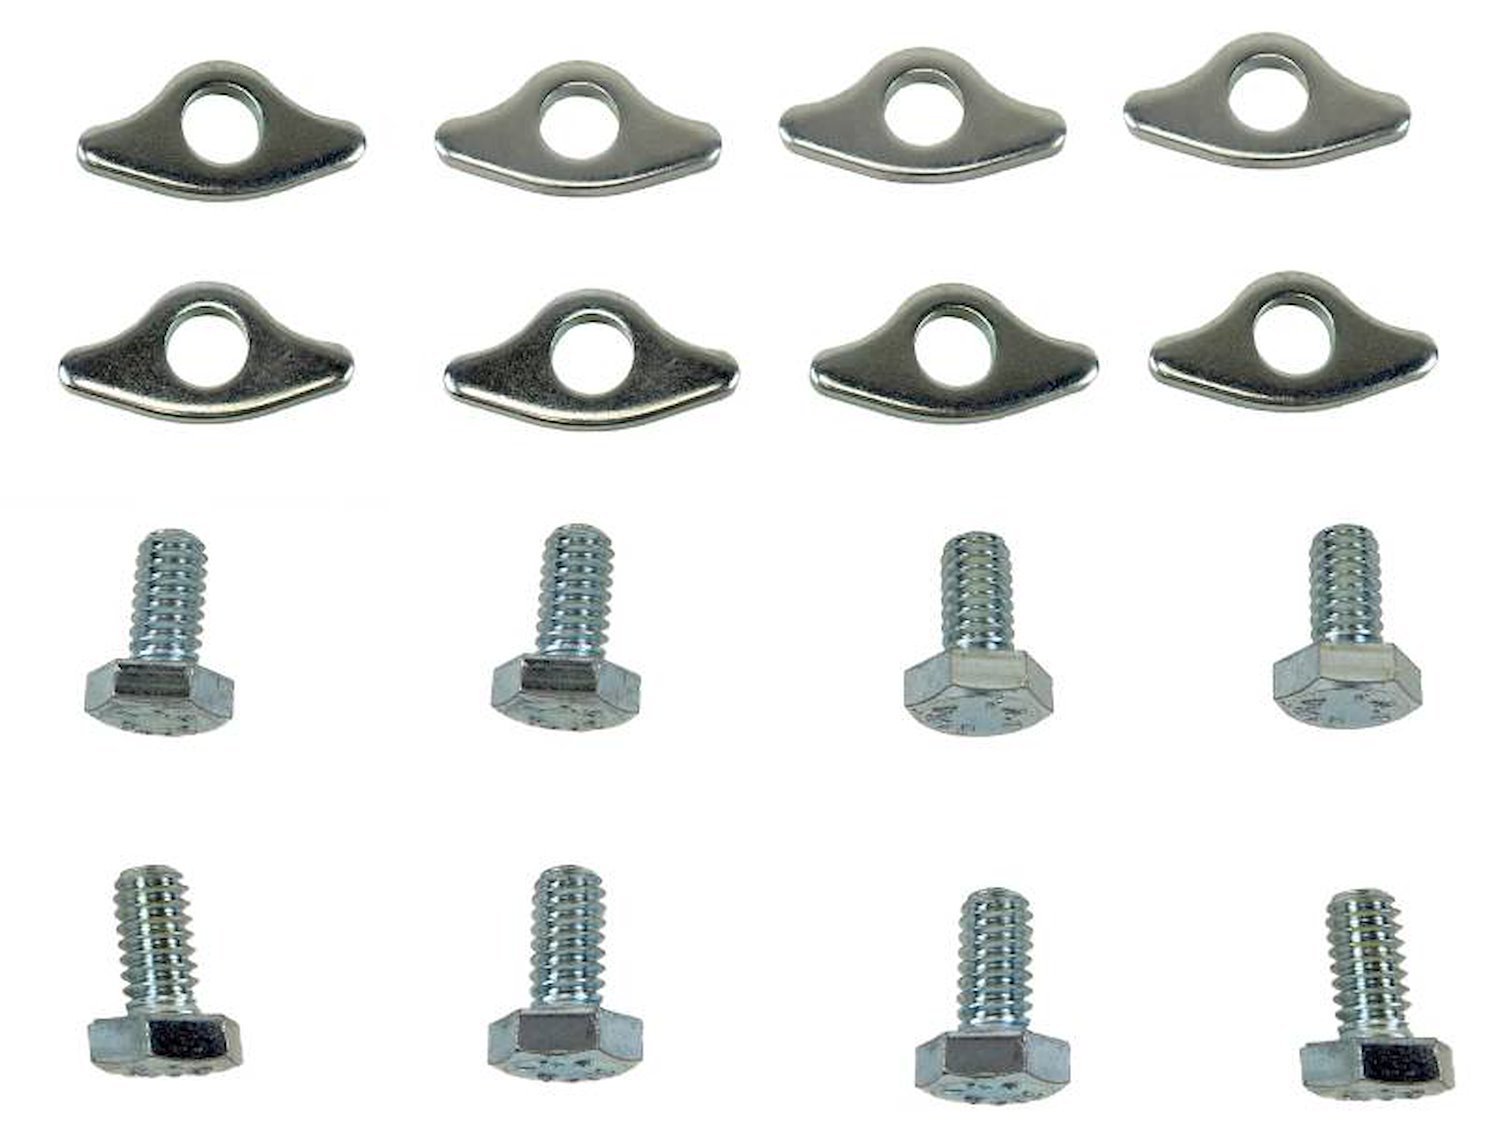 VCRB43 1964 Chevrolet Full-Size Valve Cover Bolts & Washer Set